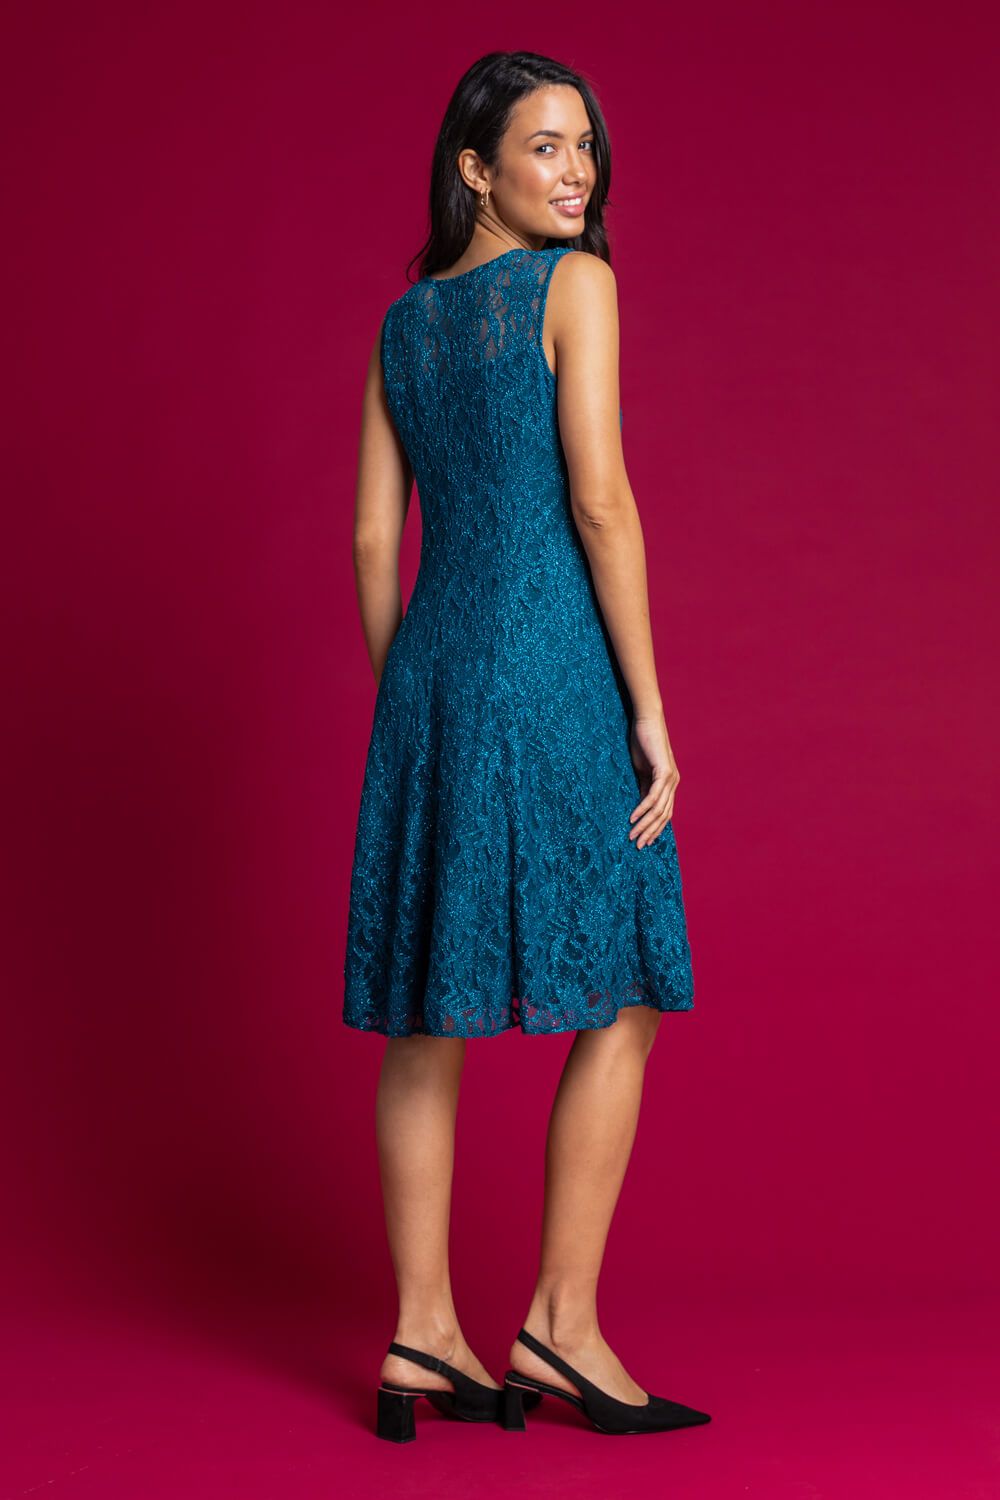 Teal Glitter Lace Fit And Flare Dress, Image 2 of 4